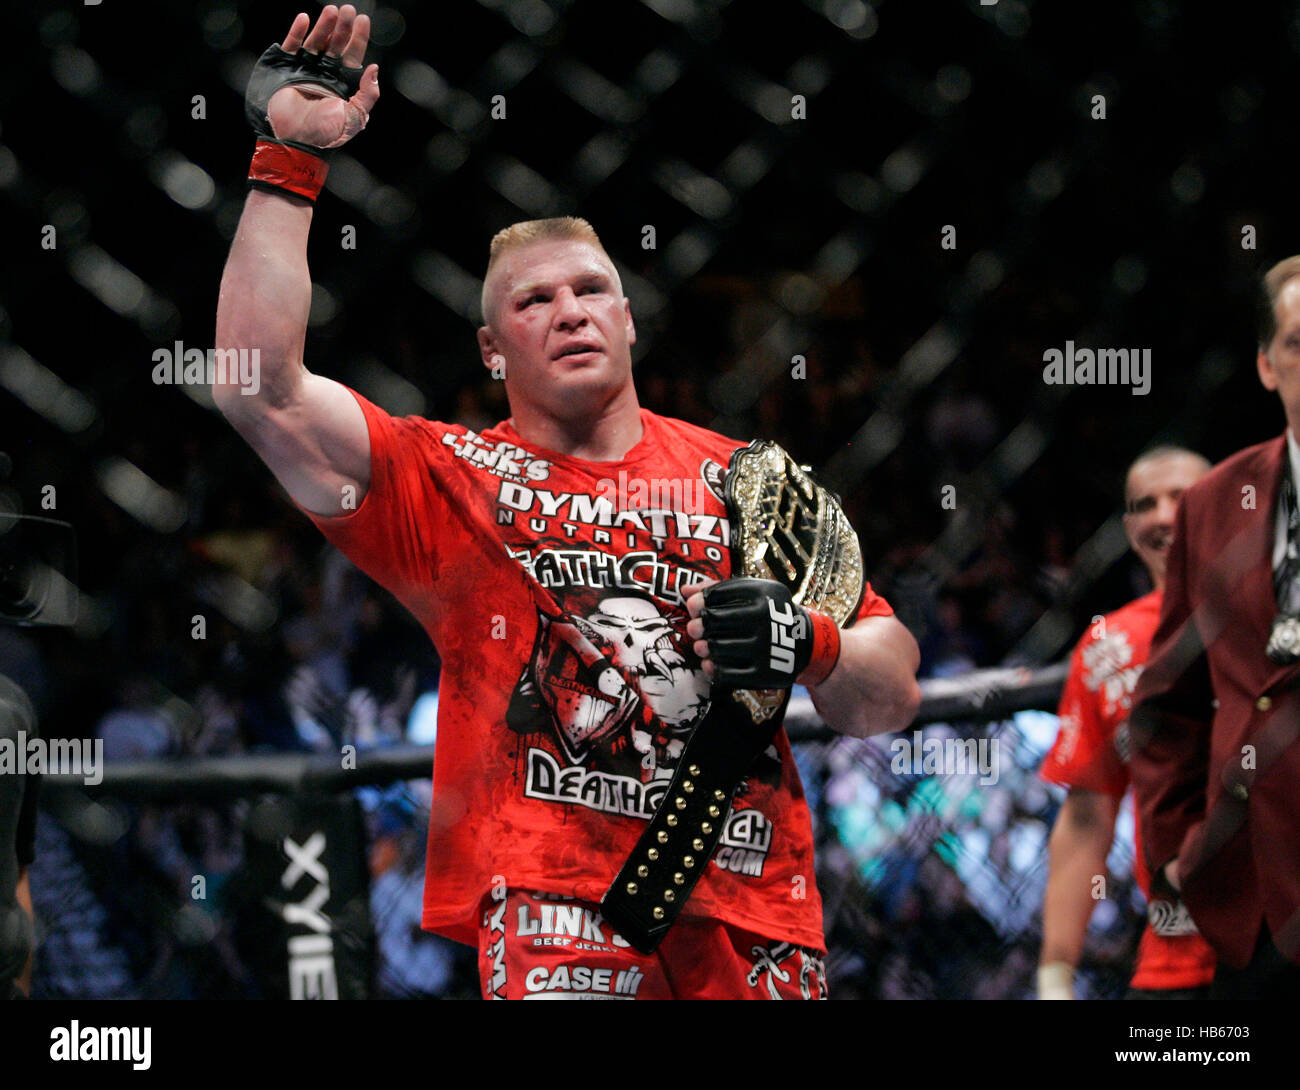 UFC fighter Brock Lesnar celebrates his victory over Shane Carwin at UFC 116 at the Grand Garden Arena on July 3, 2010, in Las Vegas, Nevada. Photo by Francis Specker Stock Photo